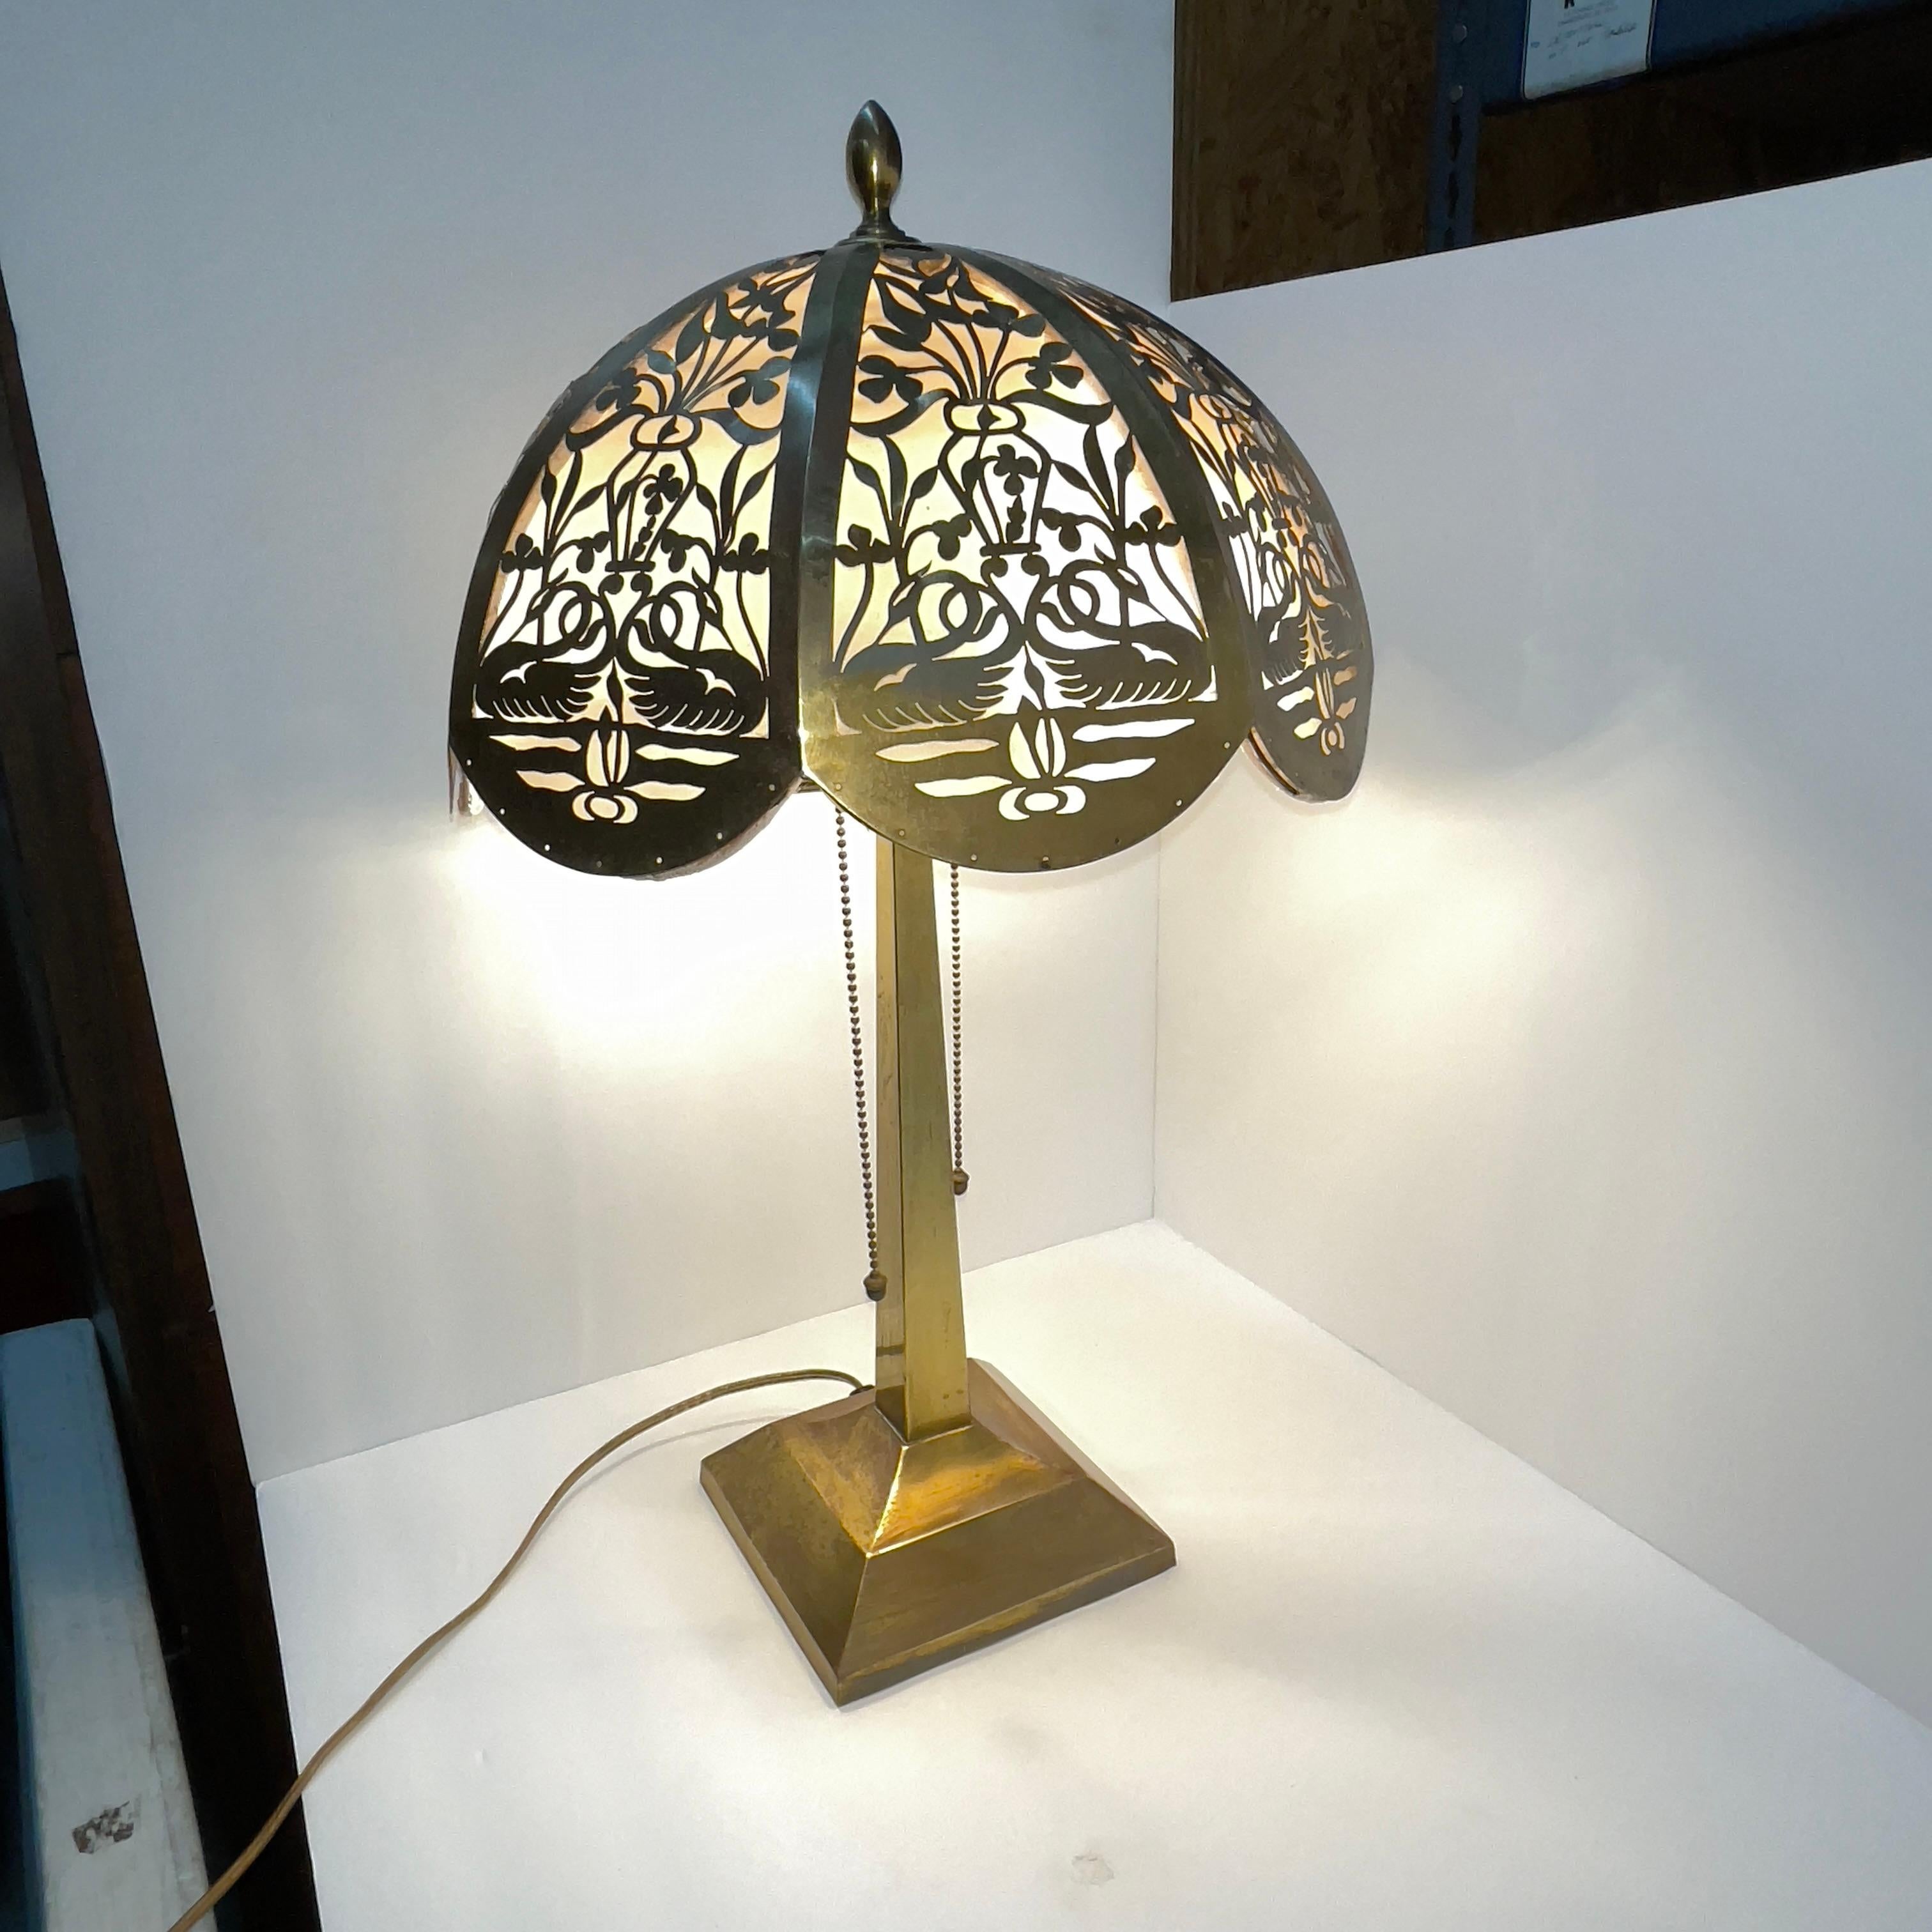 For your consideration is a fantastic brass table lamp with reticulated brass shade. I don’t know about you but, I love pierced metal, ceramic, porcelain- anything pierced that has light shining through it. It may be the shadows it casts on the